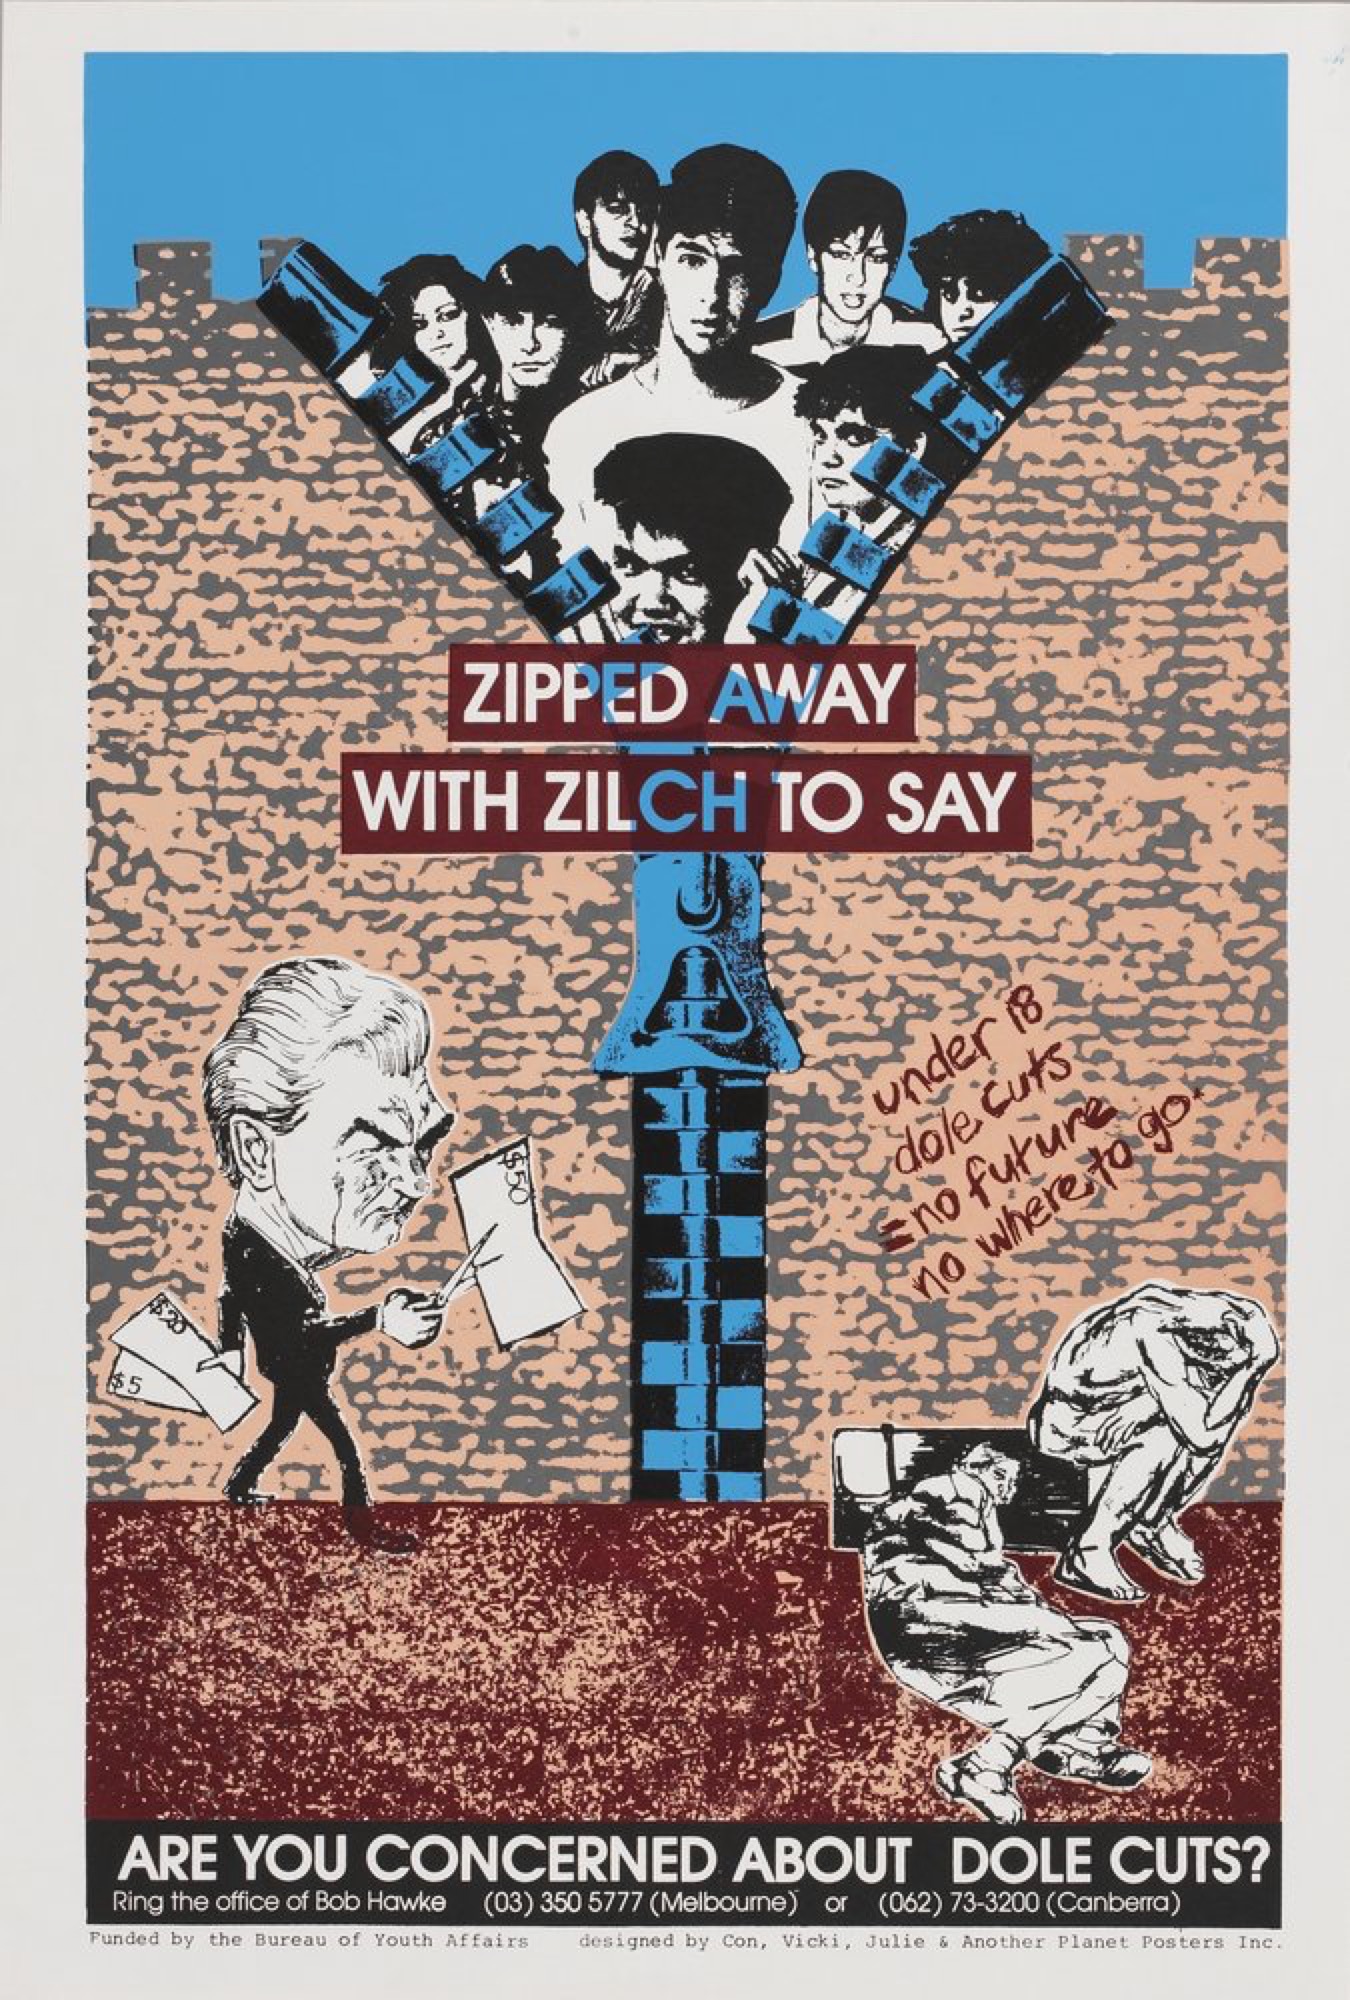 Julie Shiels<br />
<em>Zipped away with zilch to say</em>, 1987 colour screenprint.<br />
Courtesy of the State Library of Victoria